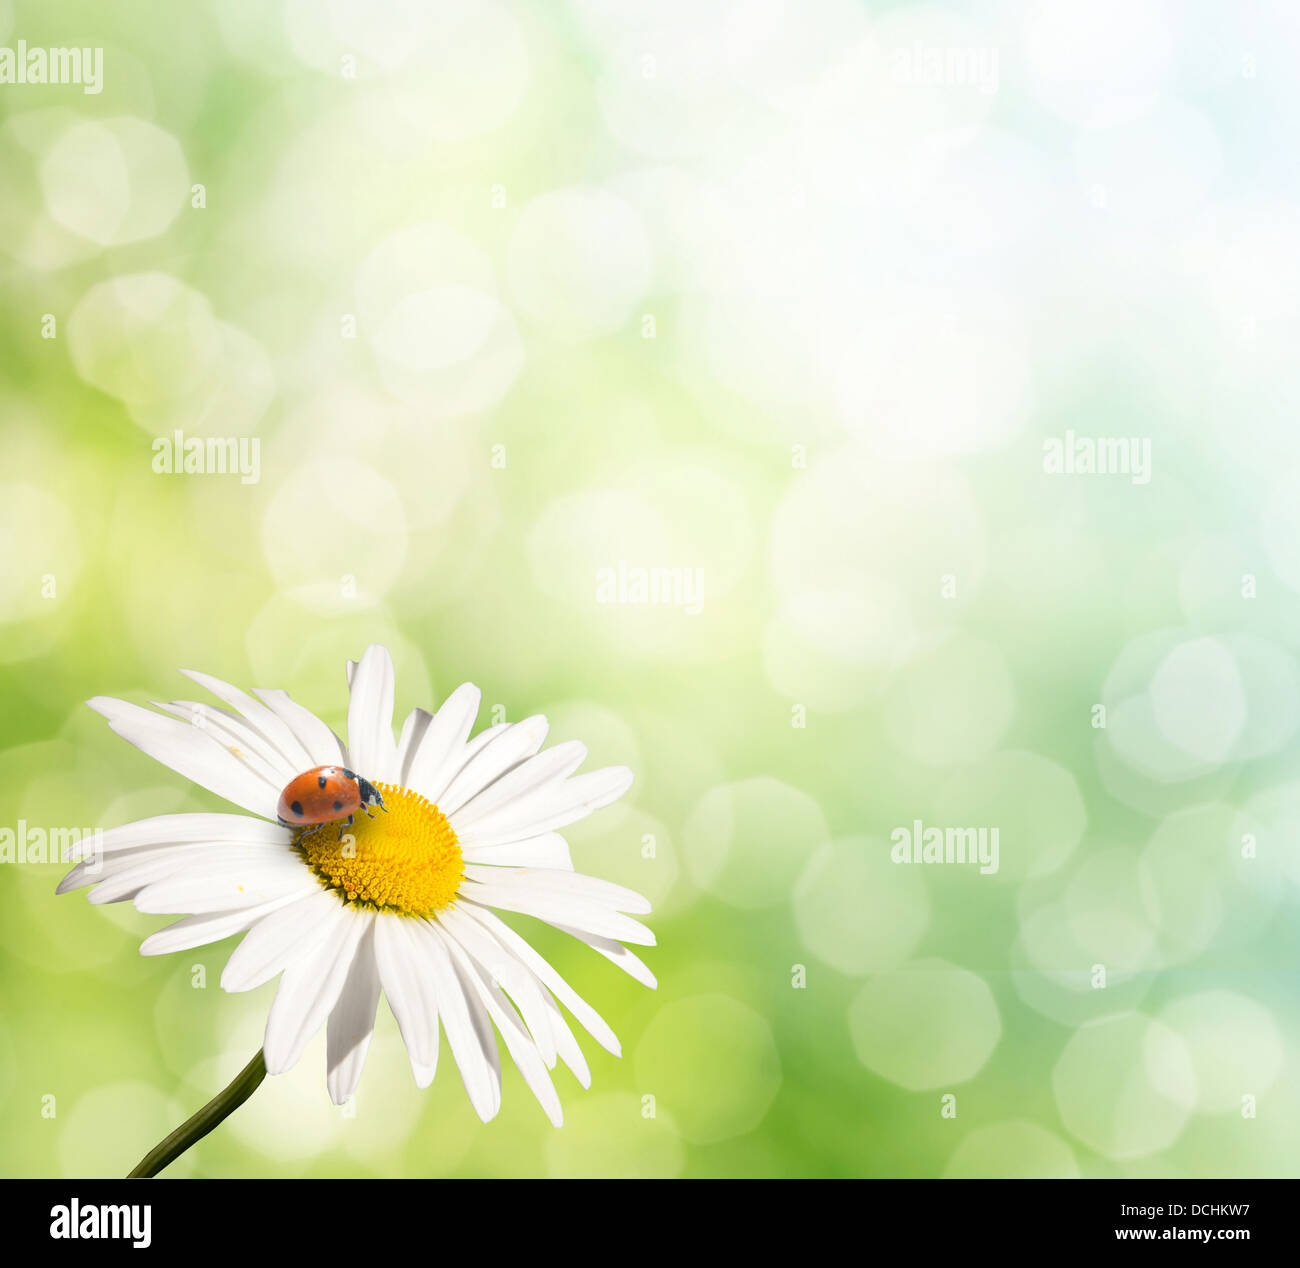 natural green background with selective focus. isolated daisy on blur background Stock Photo